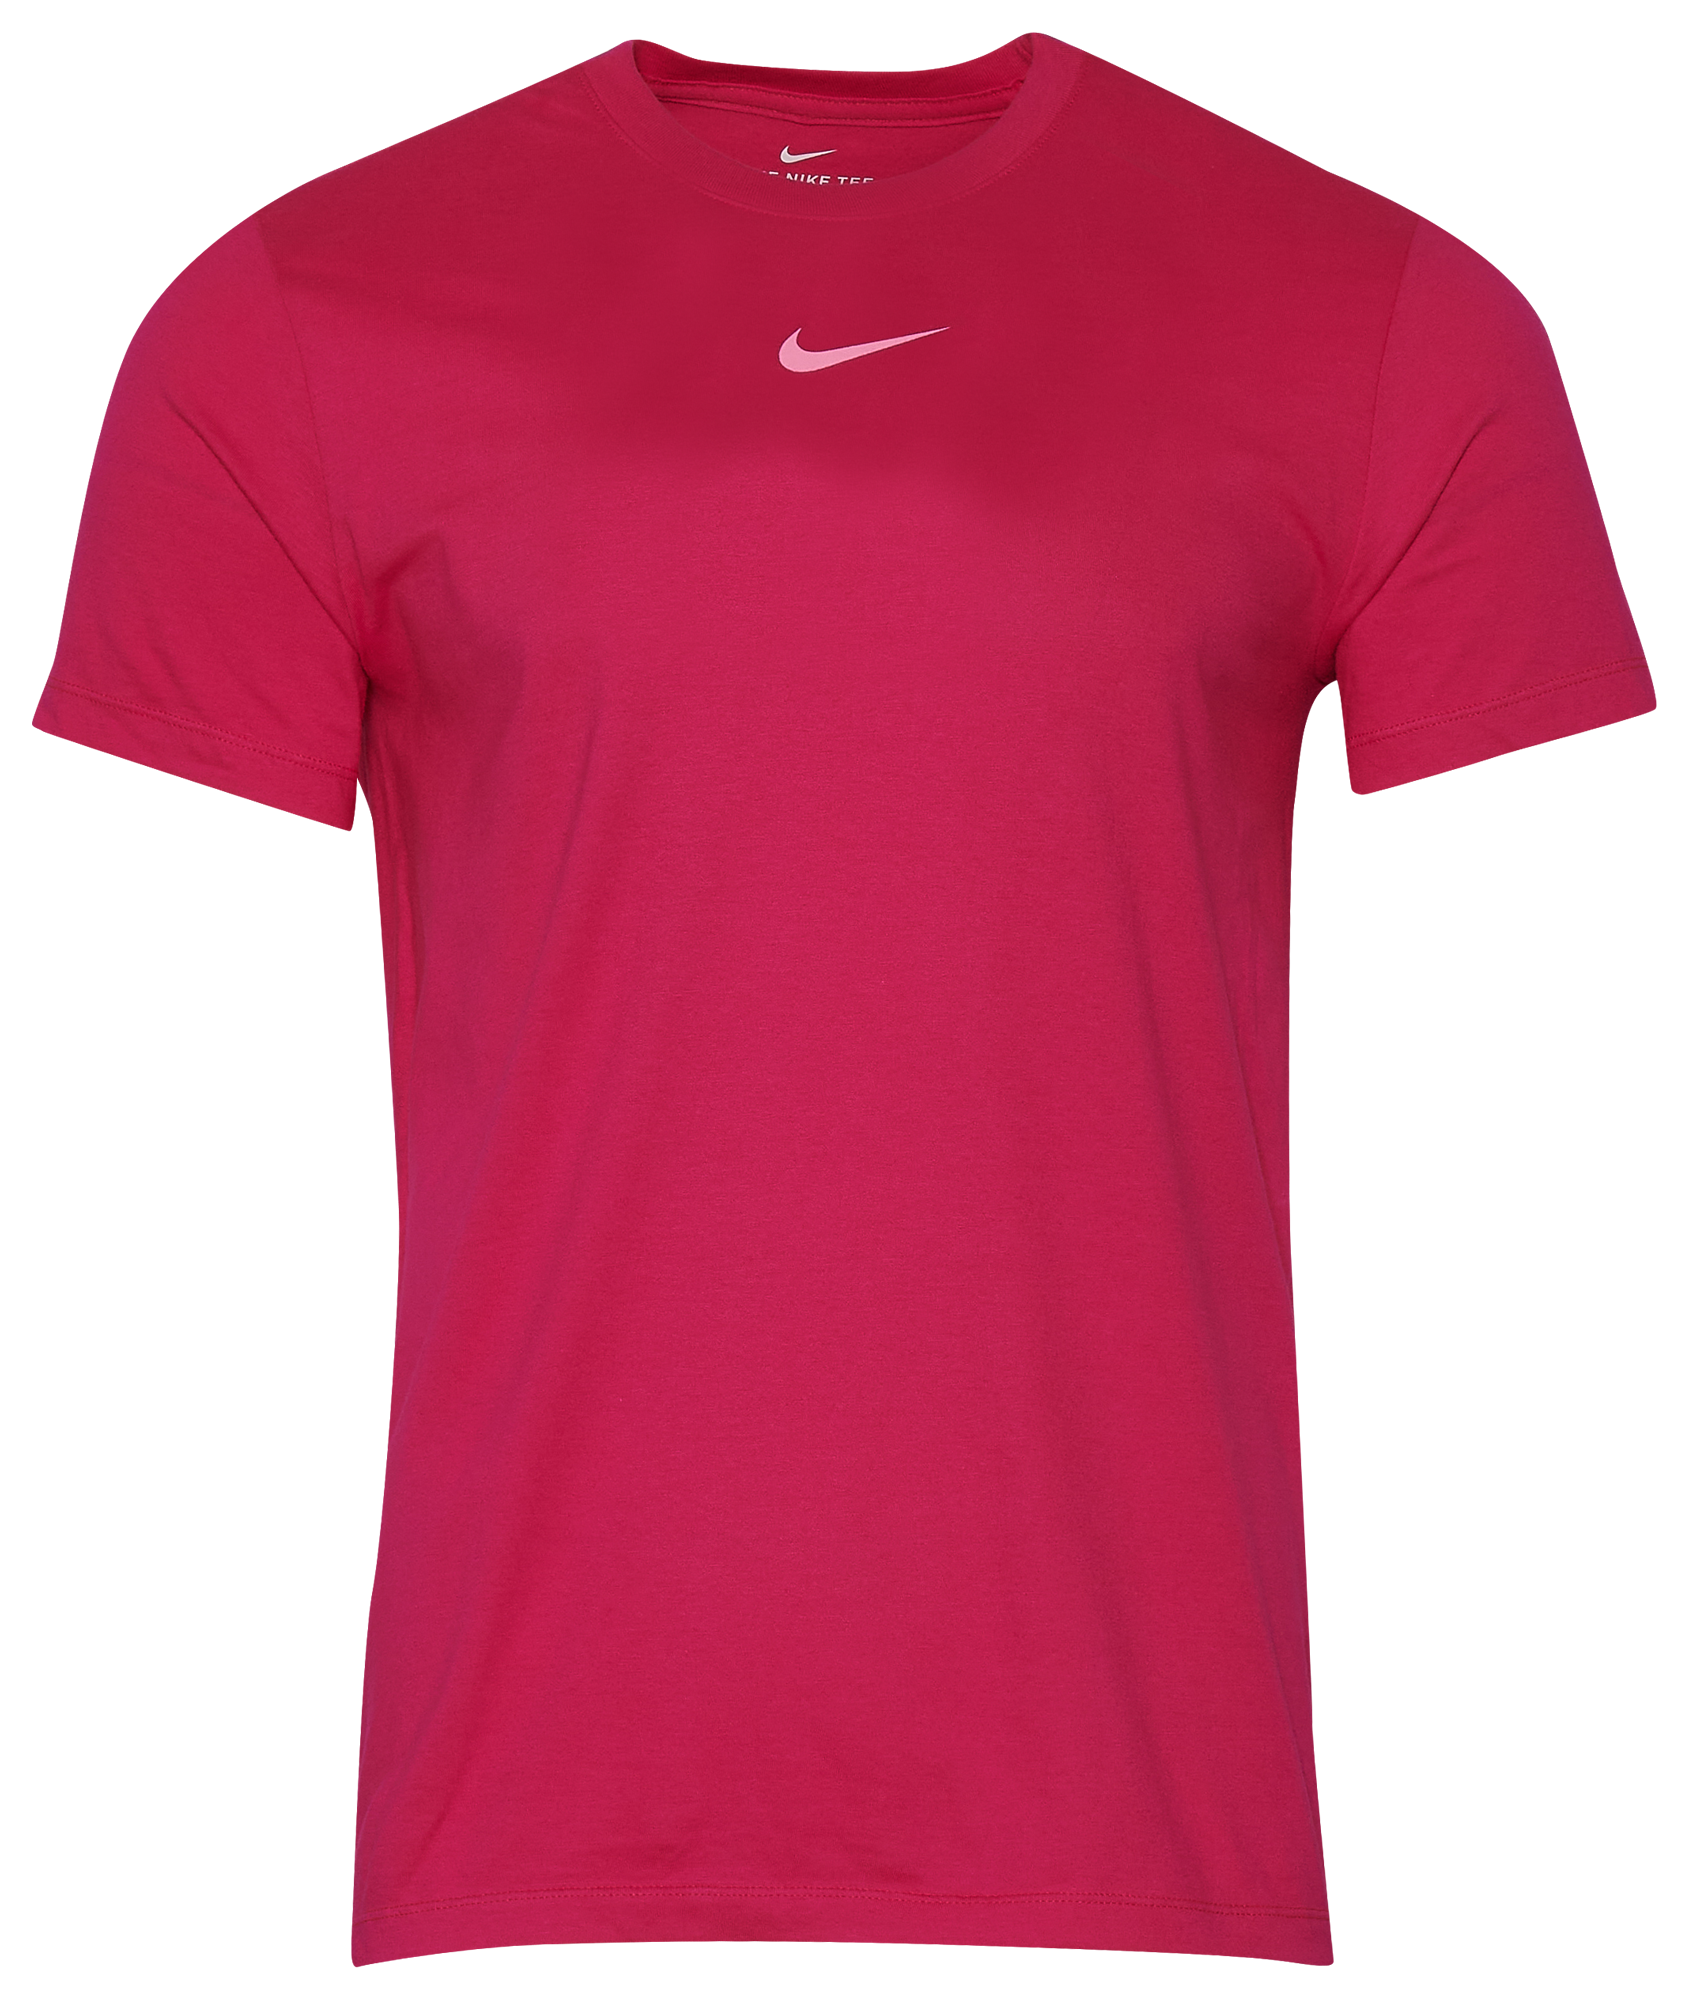 Nike Miami City Elv 90 T-shirt in Pink for Men